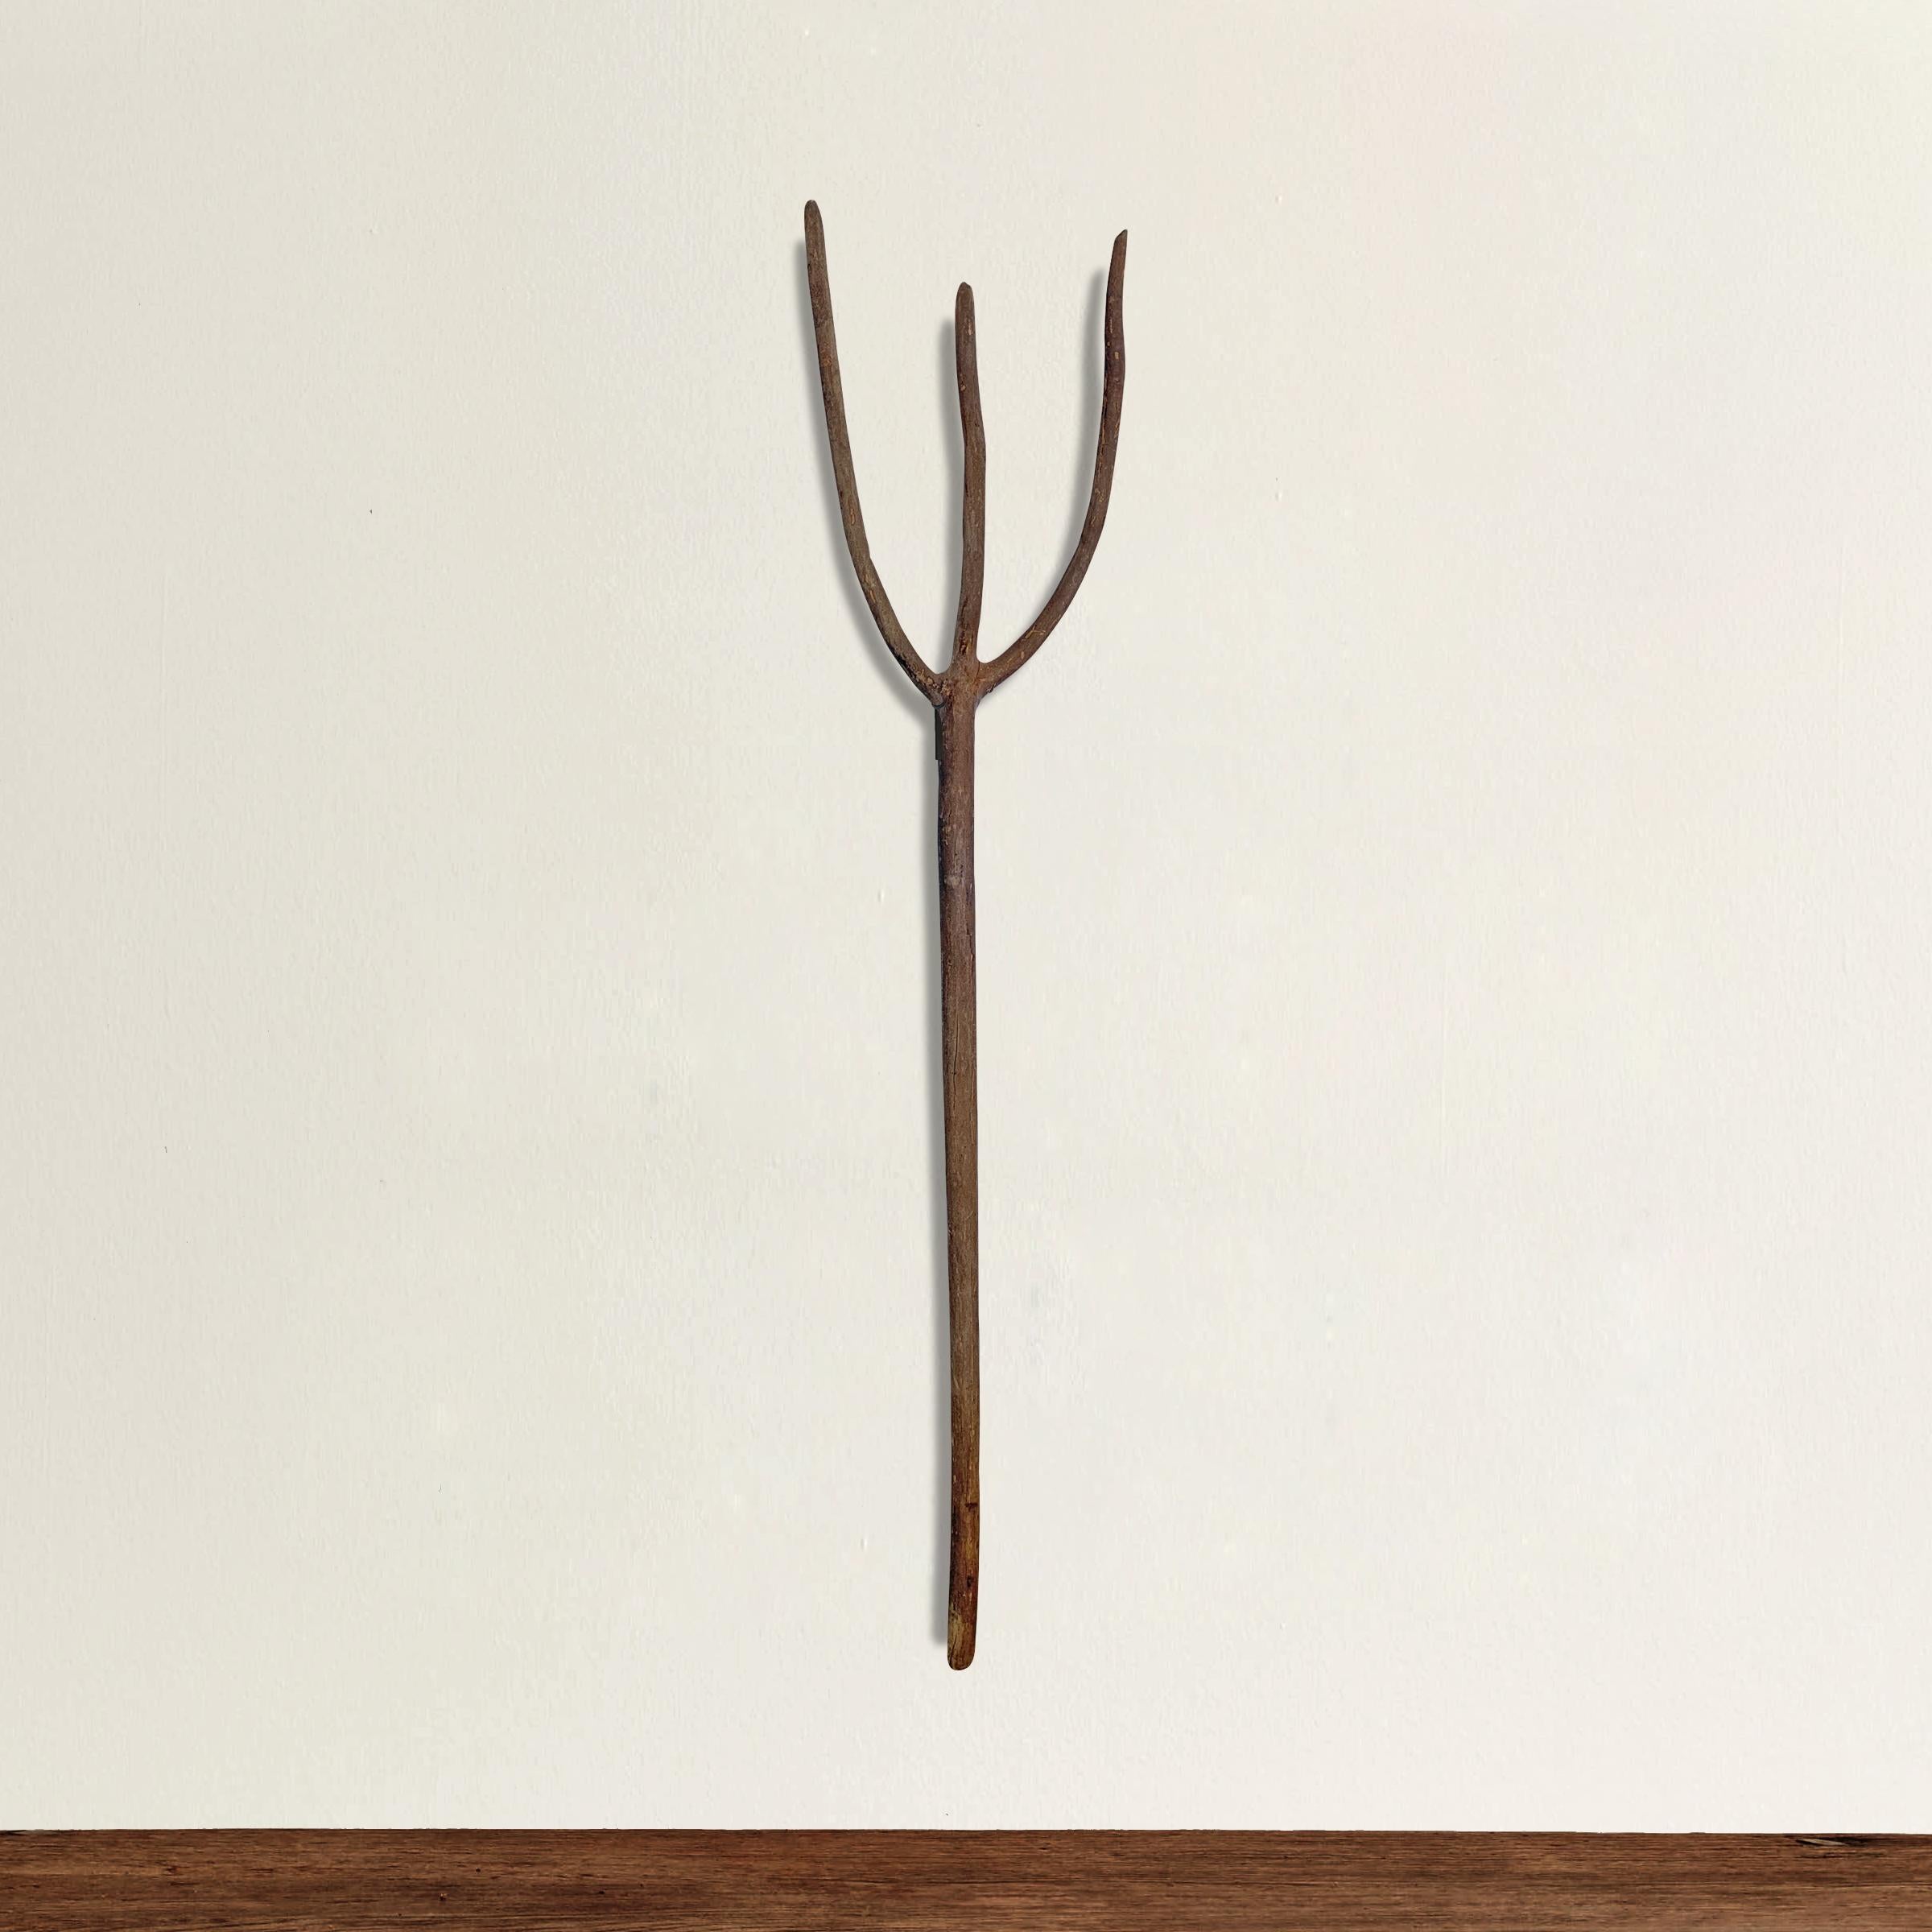 A wonderfully sculptural 19th century French espalier fruitwood hay fork mounted on a custom steel wall mount. Forks like these took years to create: A young fruit tree would be chosen and trained to grow into the desired shape, and then harvested